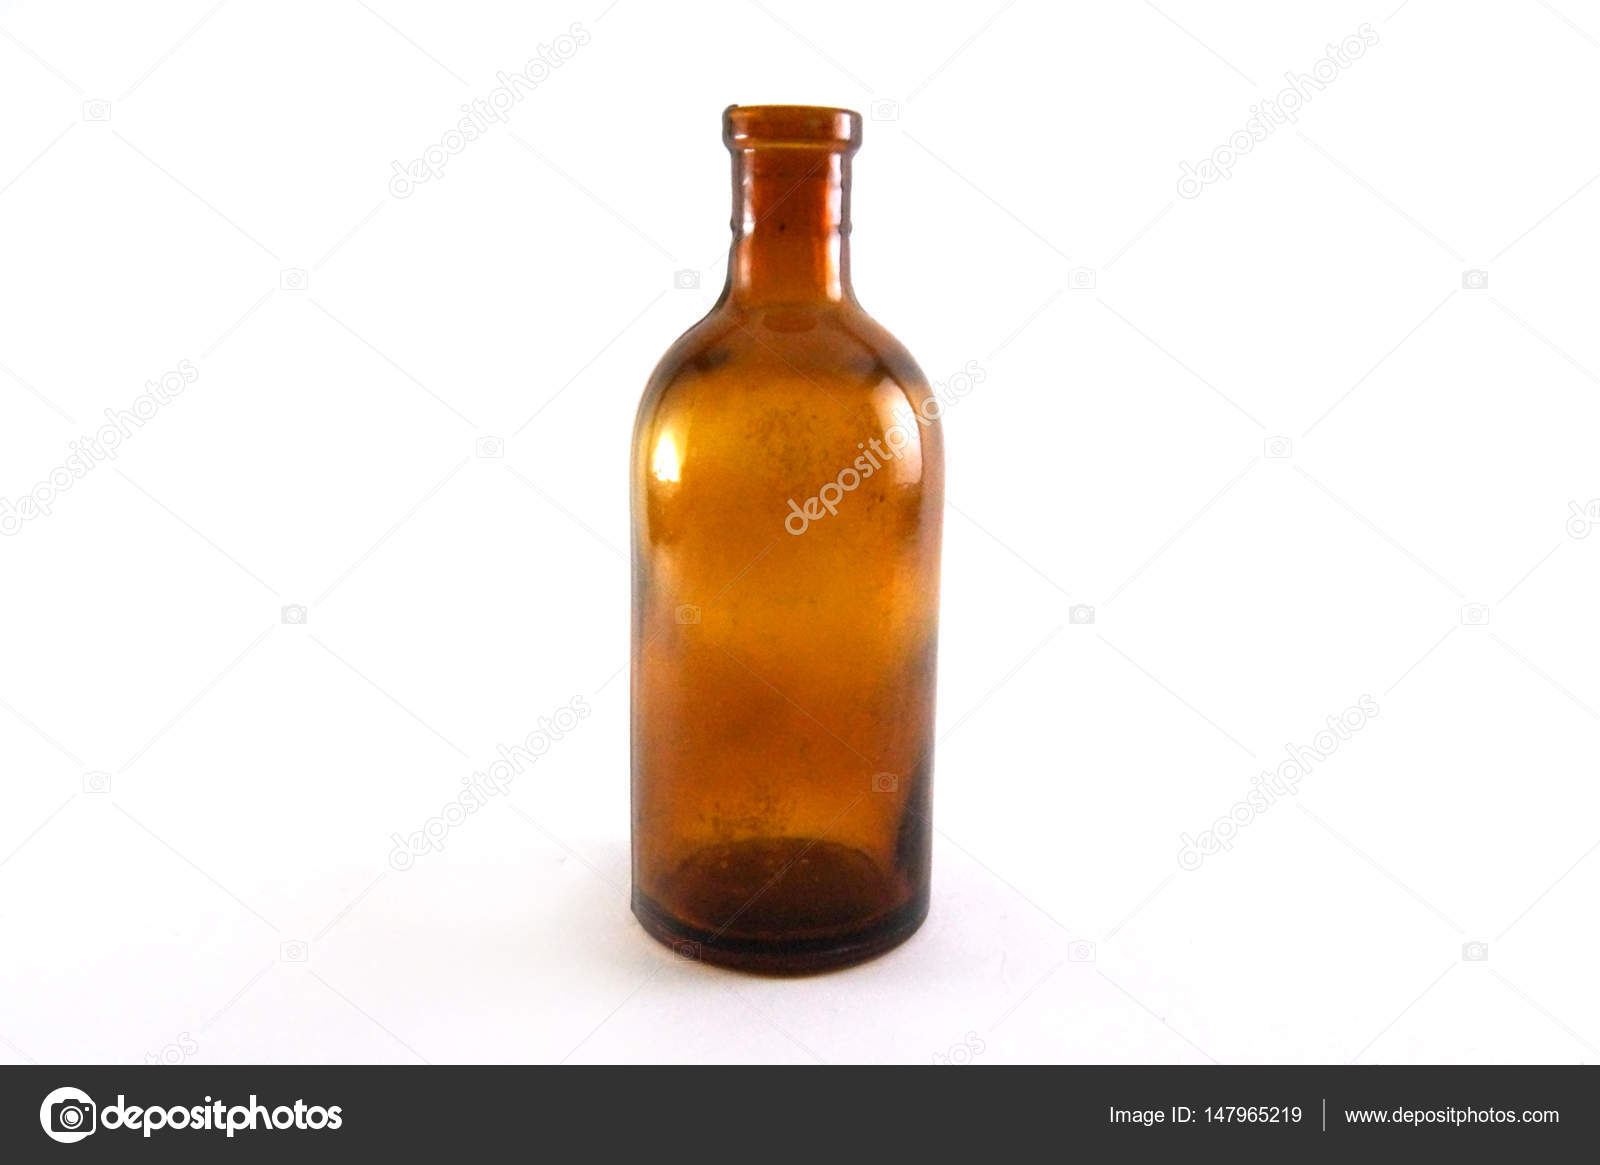 Download Old Clear Glass Bottle Decorative Tiny Bottle Small Medicine Bottle Small Vintage Bottle Retro Home Decor Small Bottle Brown Glass Bottle Stock Photo Image By C Nostalgishop 147965219